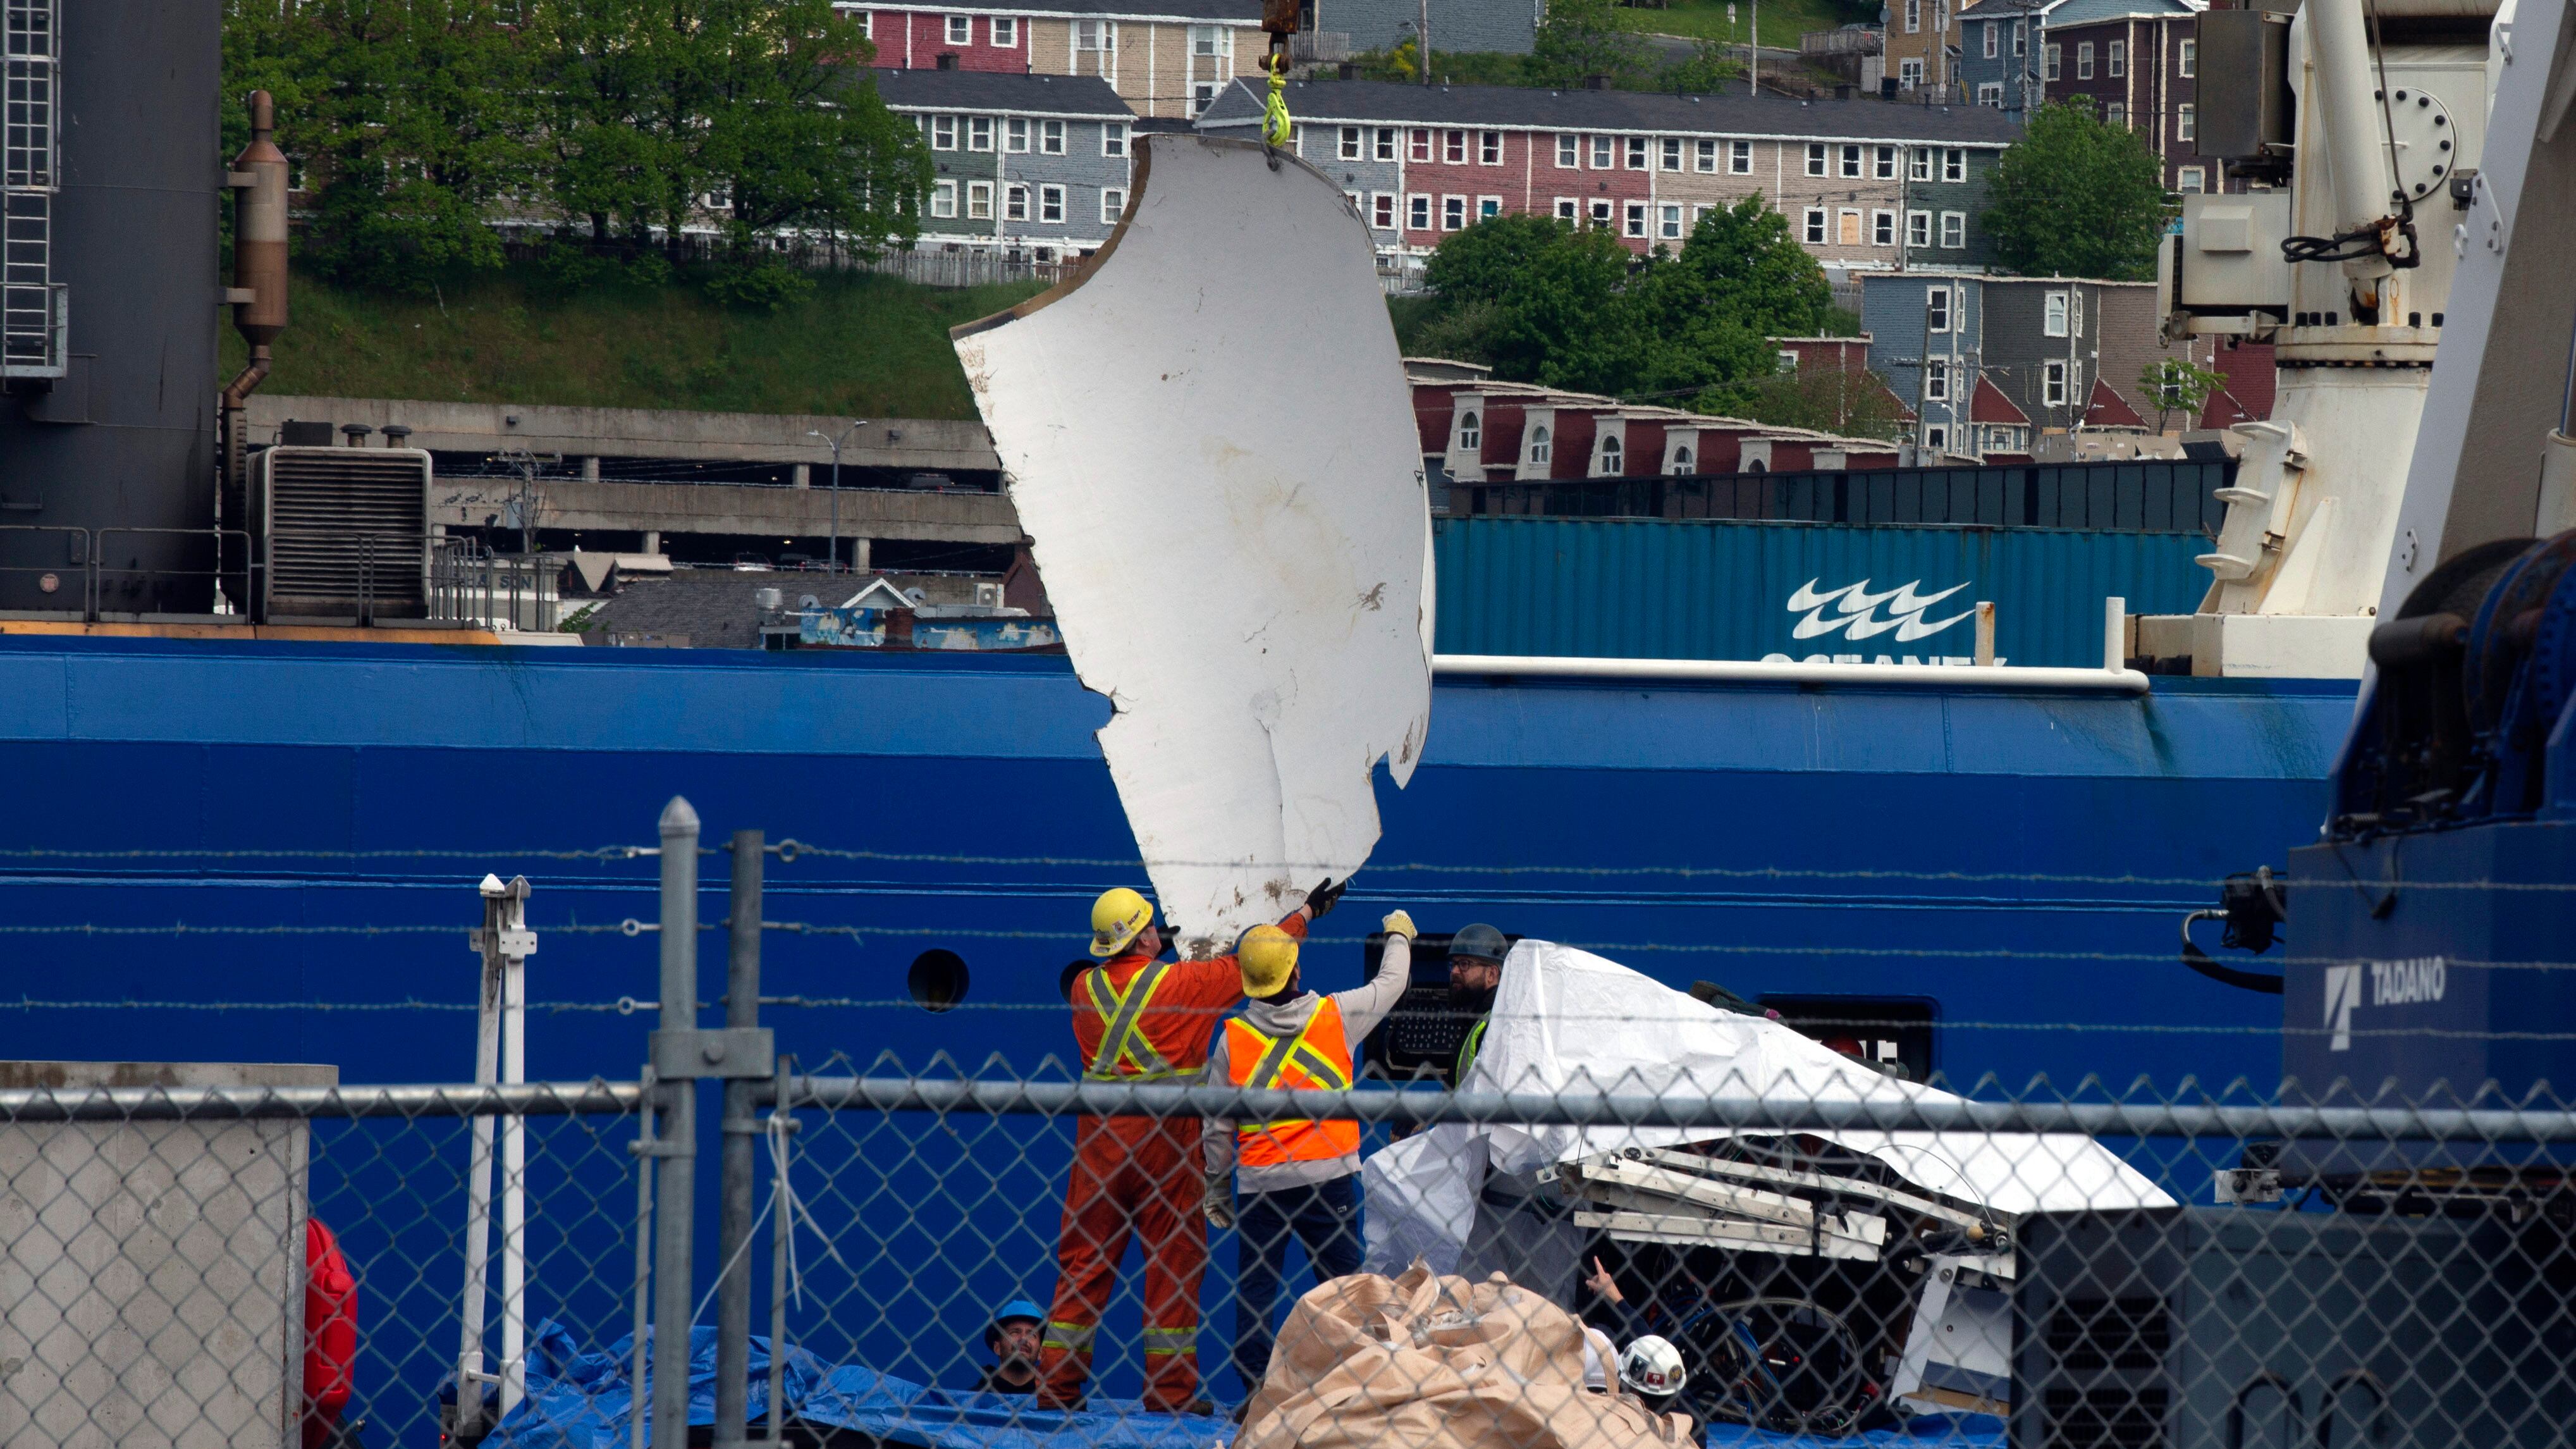 Debris from the Titan submersible, recovered from the ocean floor near the wreck of the Titanic, is unloaded from the ship Horizon Arctic at the Canadian Coast Guard pier in Newfoundland (Paul Daly/The Canadian Press via AP/File)